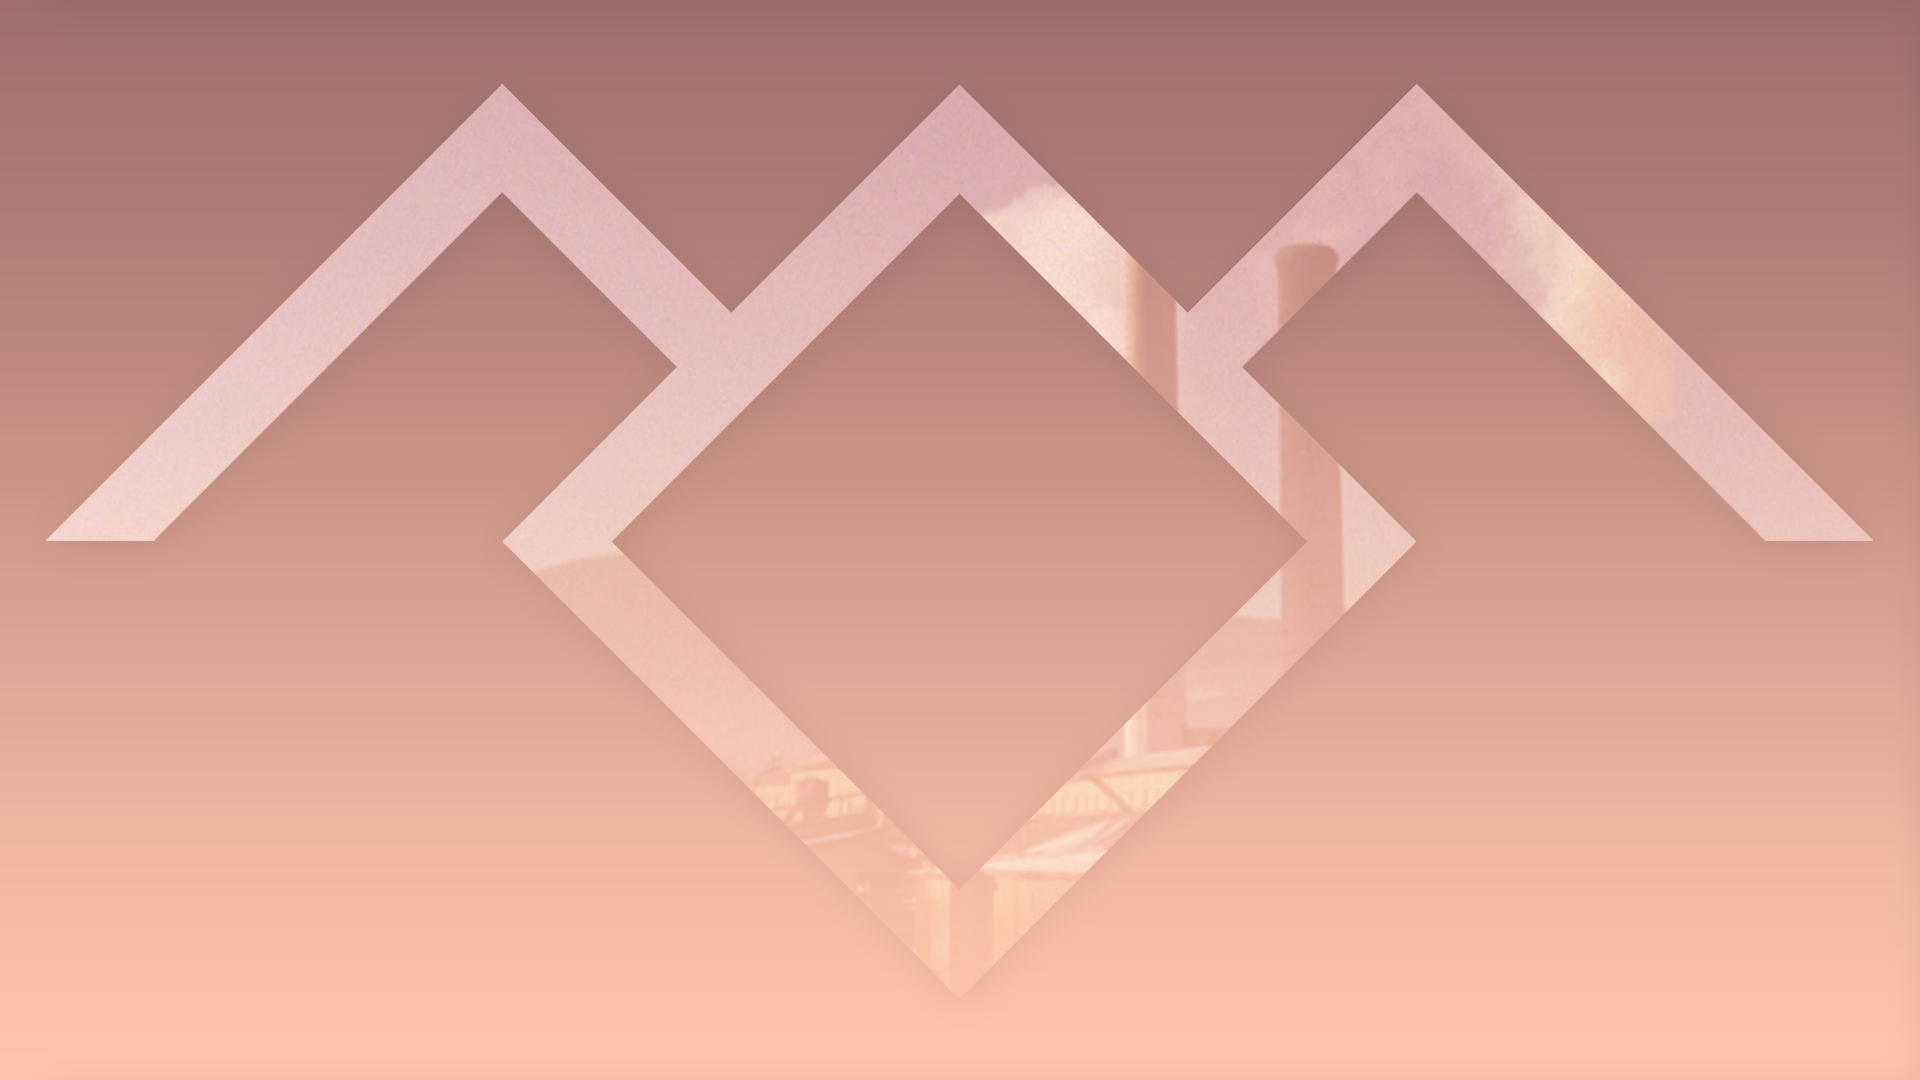 Scrambled Together This Minimalistic-looking Wallpaper - Minimalist Wallpaper Twin Peaks , HD Wallpaper & Backgrounds